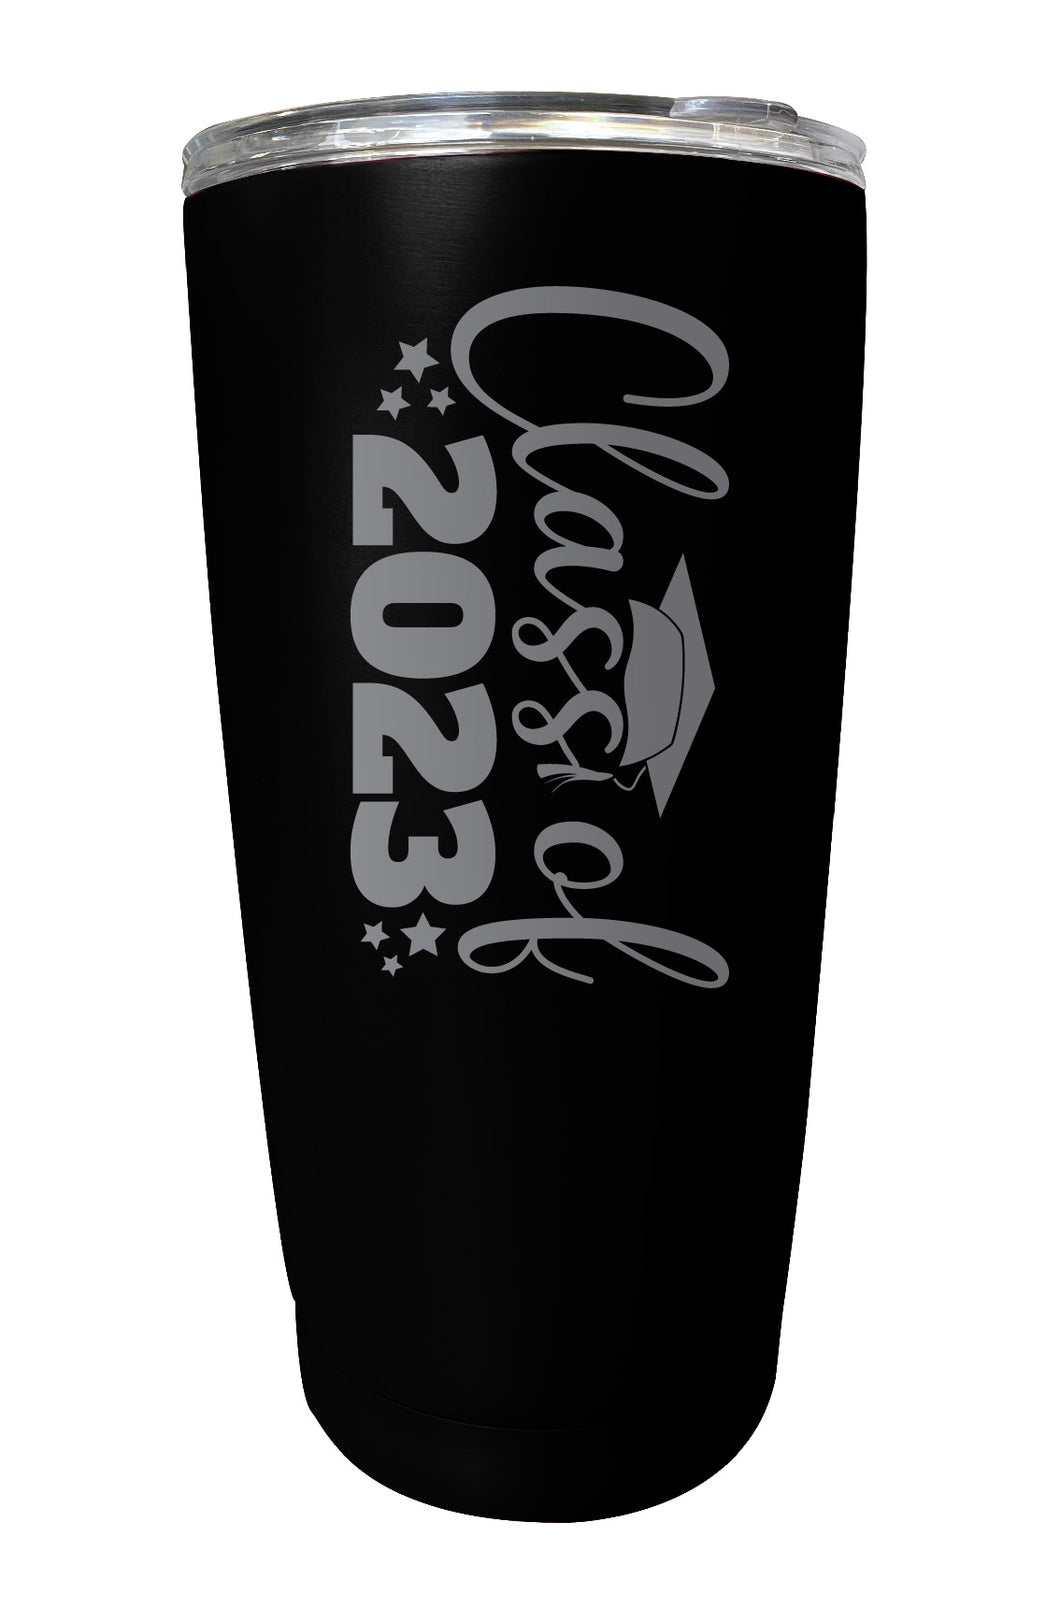 Class of 2023 Graduation 16 oz Engraved Stainless Steel Insulated Tumbler Colors